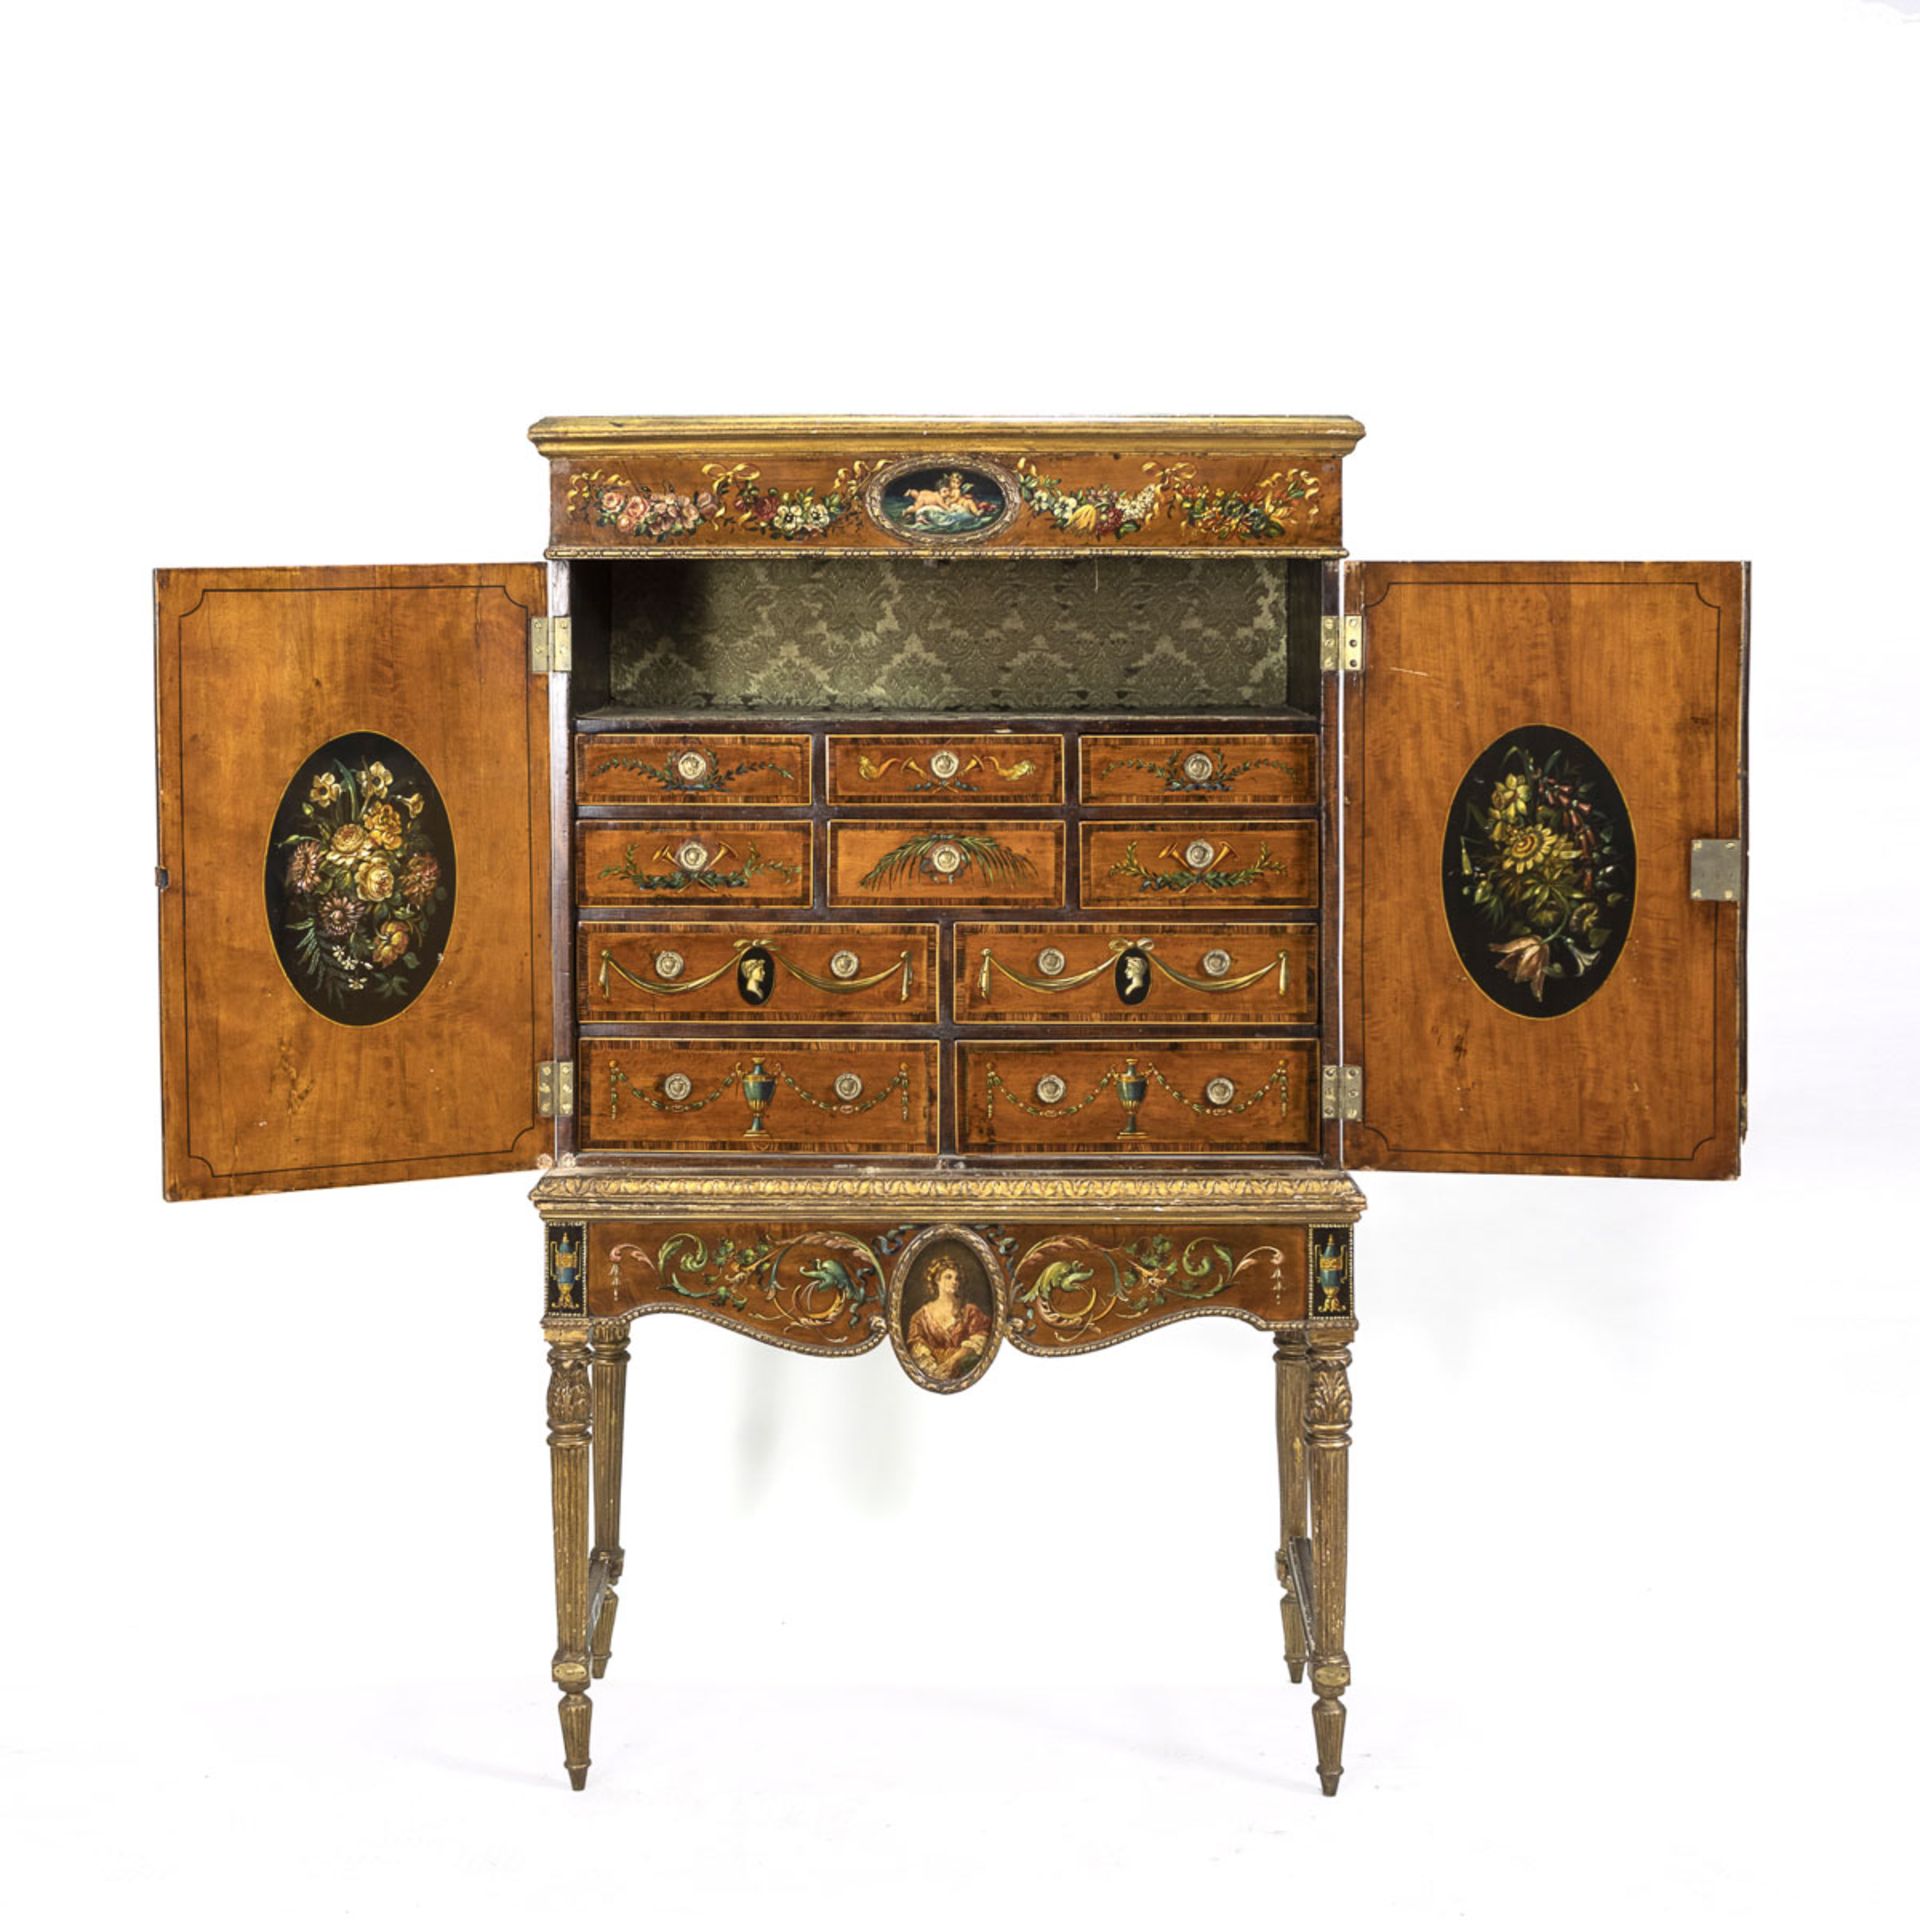 W.P Rackham, painted wooden cabinet - Image 2 of 2